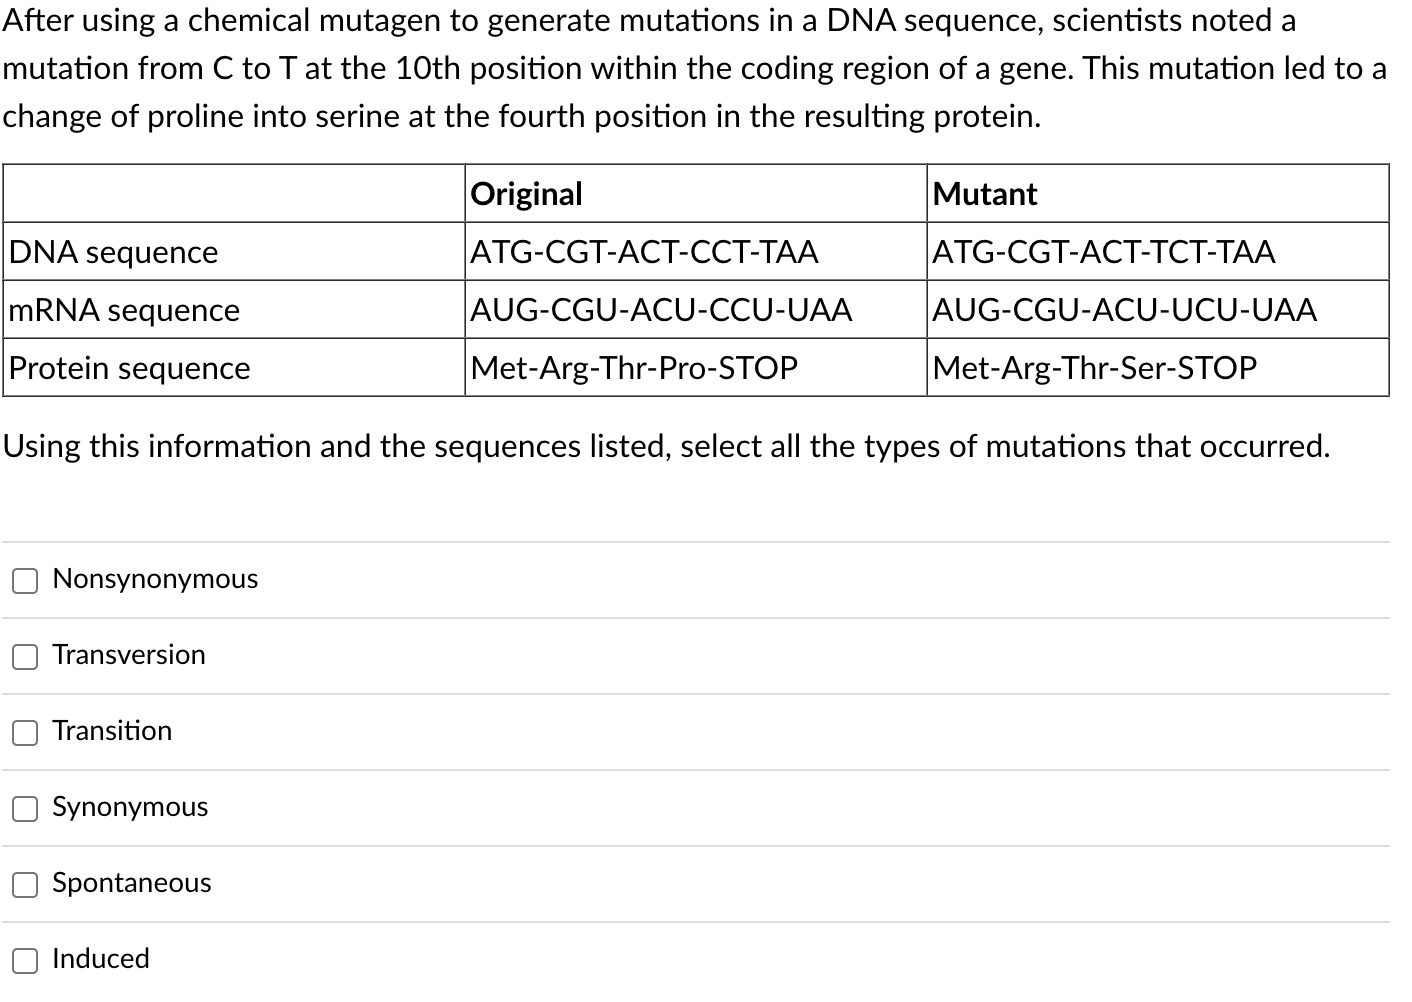 After using a chemical mutagen to generate mutations in a DNA sequence, scientists noted a mutation from \( \mathrm{C} \) to 